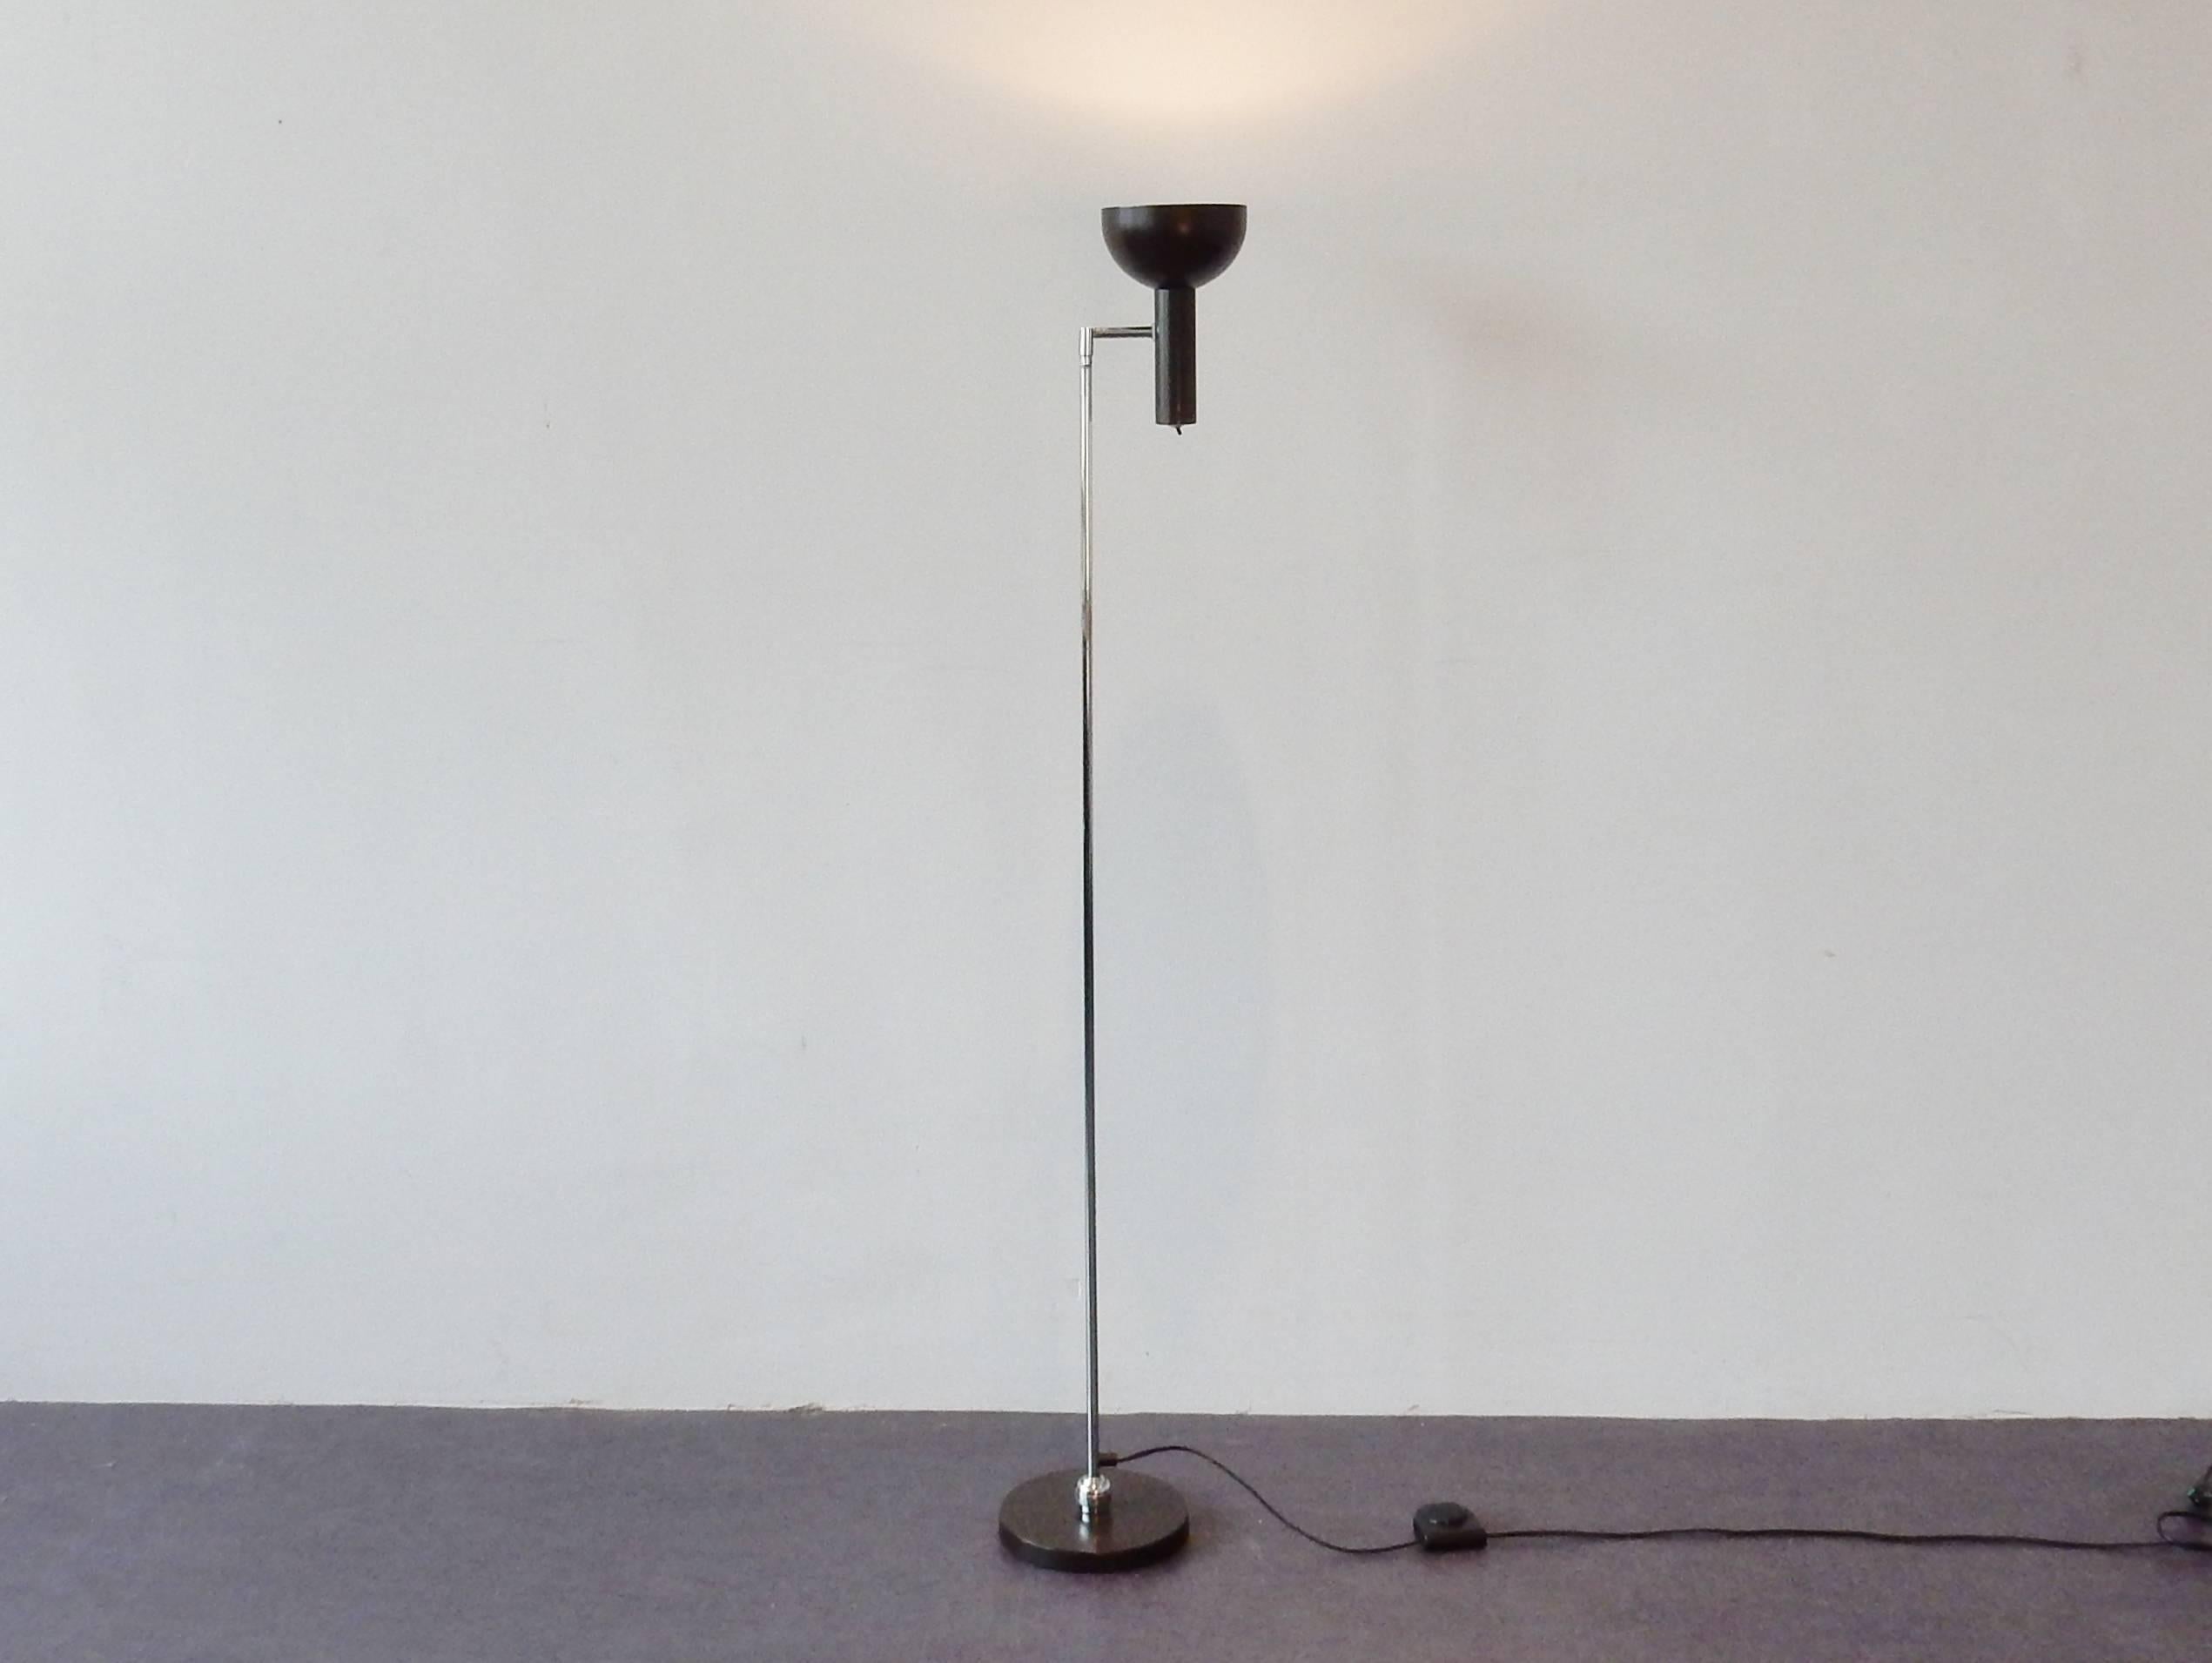 This floor lamp is in an almost as new condition. The dark brown lacquer has maintained a great condition. This lamp can be moved to all directions due to the 'ball in socket' joint on the floor plate. The top hood can be moved around, as well as up